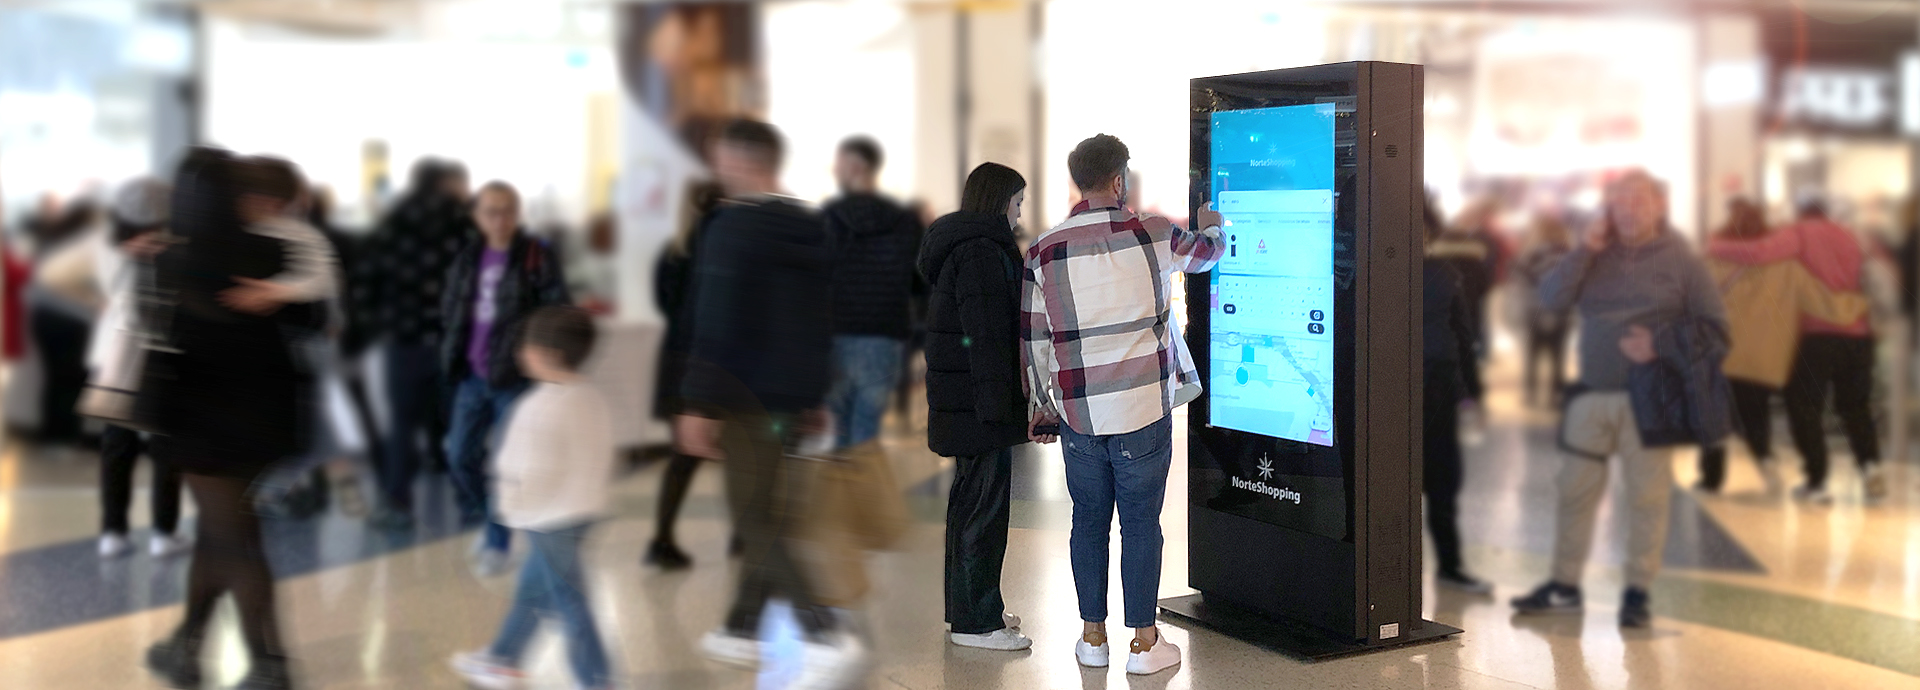 Norte Shopping optimizes communication with <span class='text-highlight'>Interactive Digital Billboards</span> from PARTTEAM & OEMKIOSKS